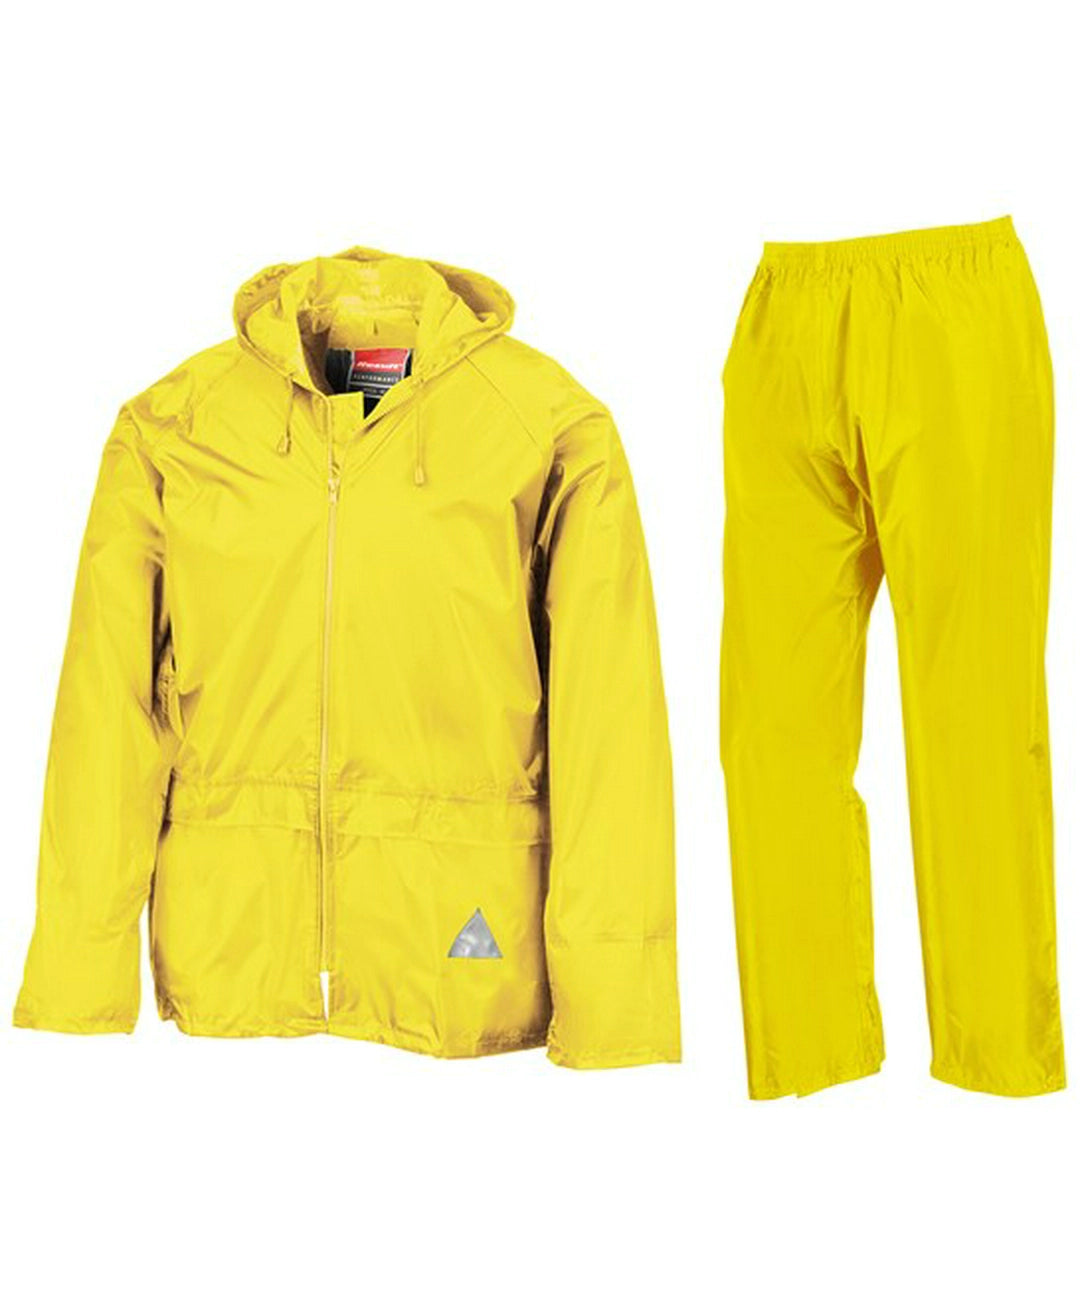 Result R95X Waterproof Jacket and Trouser Suit Set in Carry Bag - COOZO